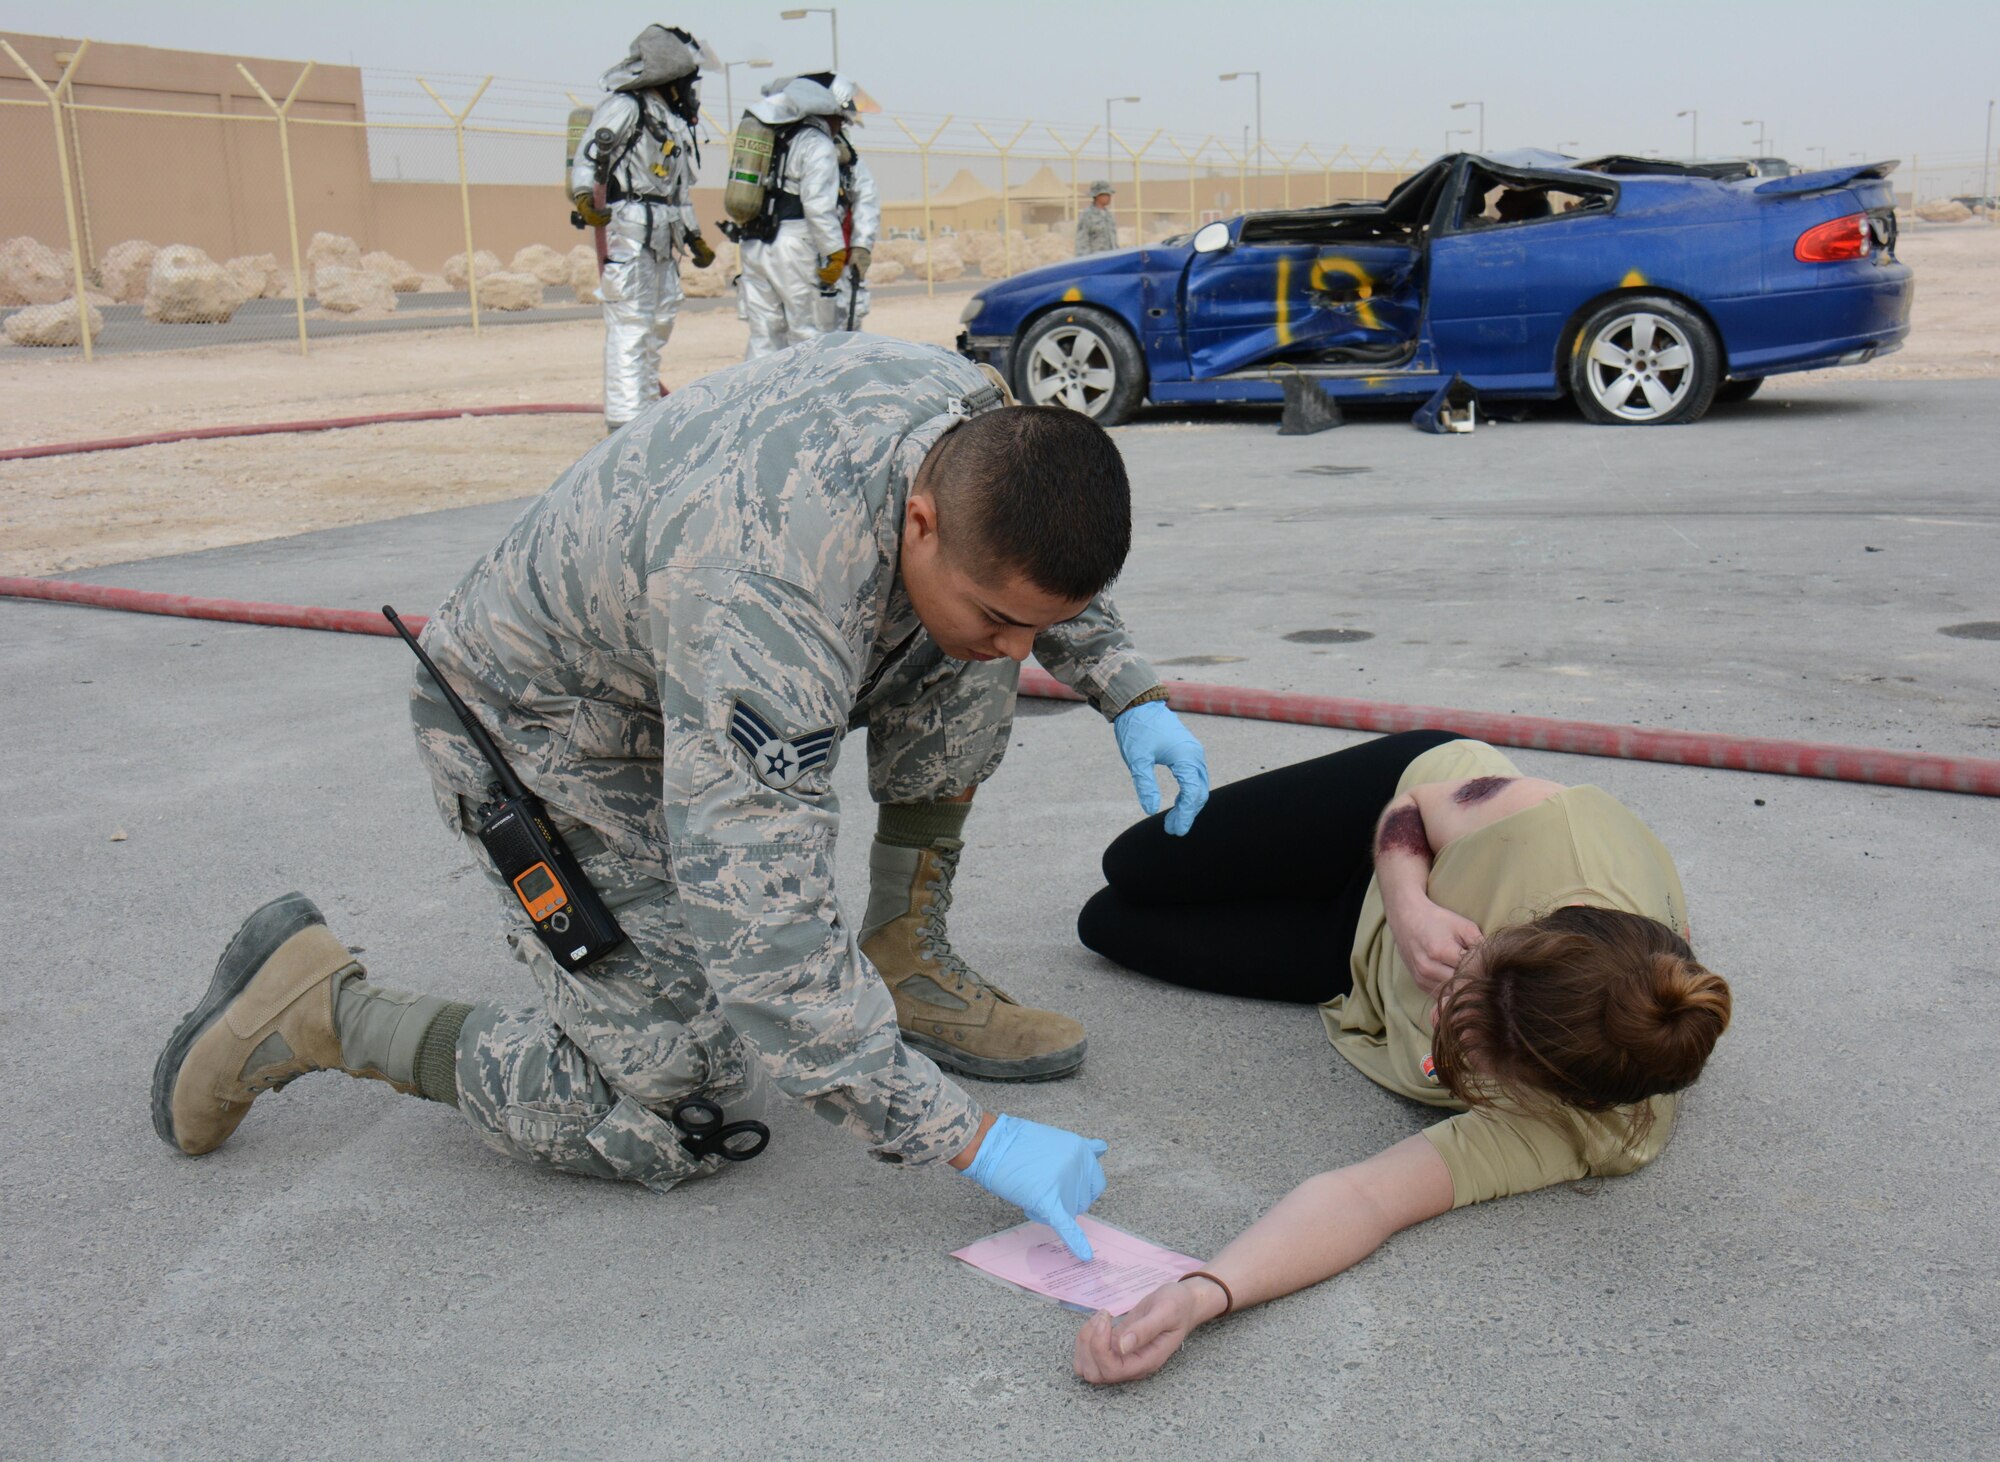 Senior Airman Marco Melendez, 379th Expeditionary Medical Operations Squadron, checks on one of eight victims of a mock car accident during a training exercise at Al Udeid Air Base, Qatar Dec. 15. More than 50 first responders participated in the exercise, including medics and firefighters. The victims of the accident were transported to the Blatchford-Preston Complex Clinic where they received emergency medical treatment. (U.S. Air Force photo by Tech. Sgt. James Hodgman/Released)